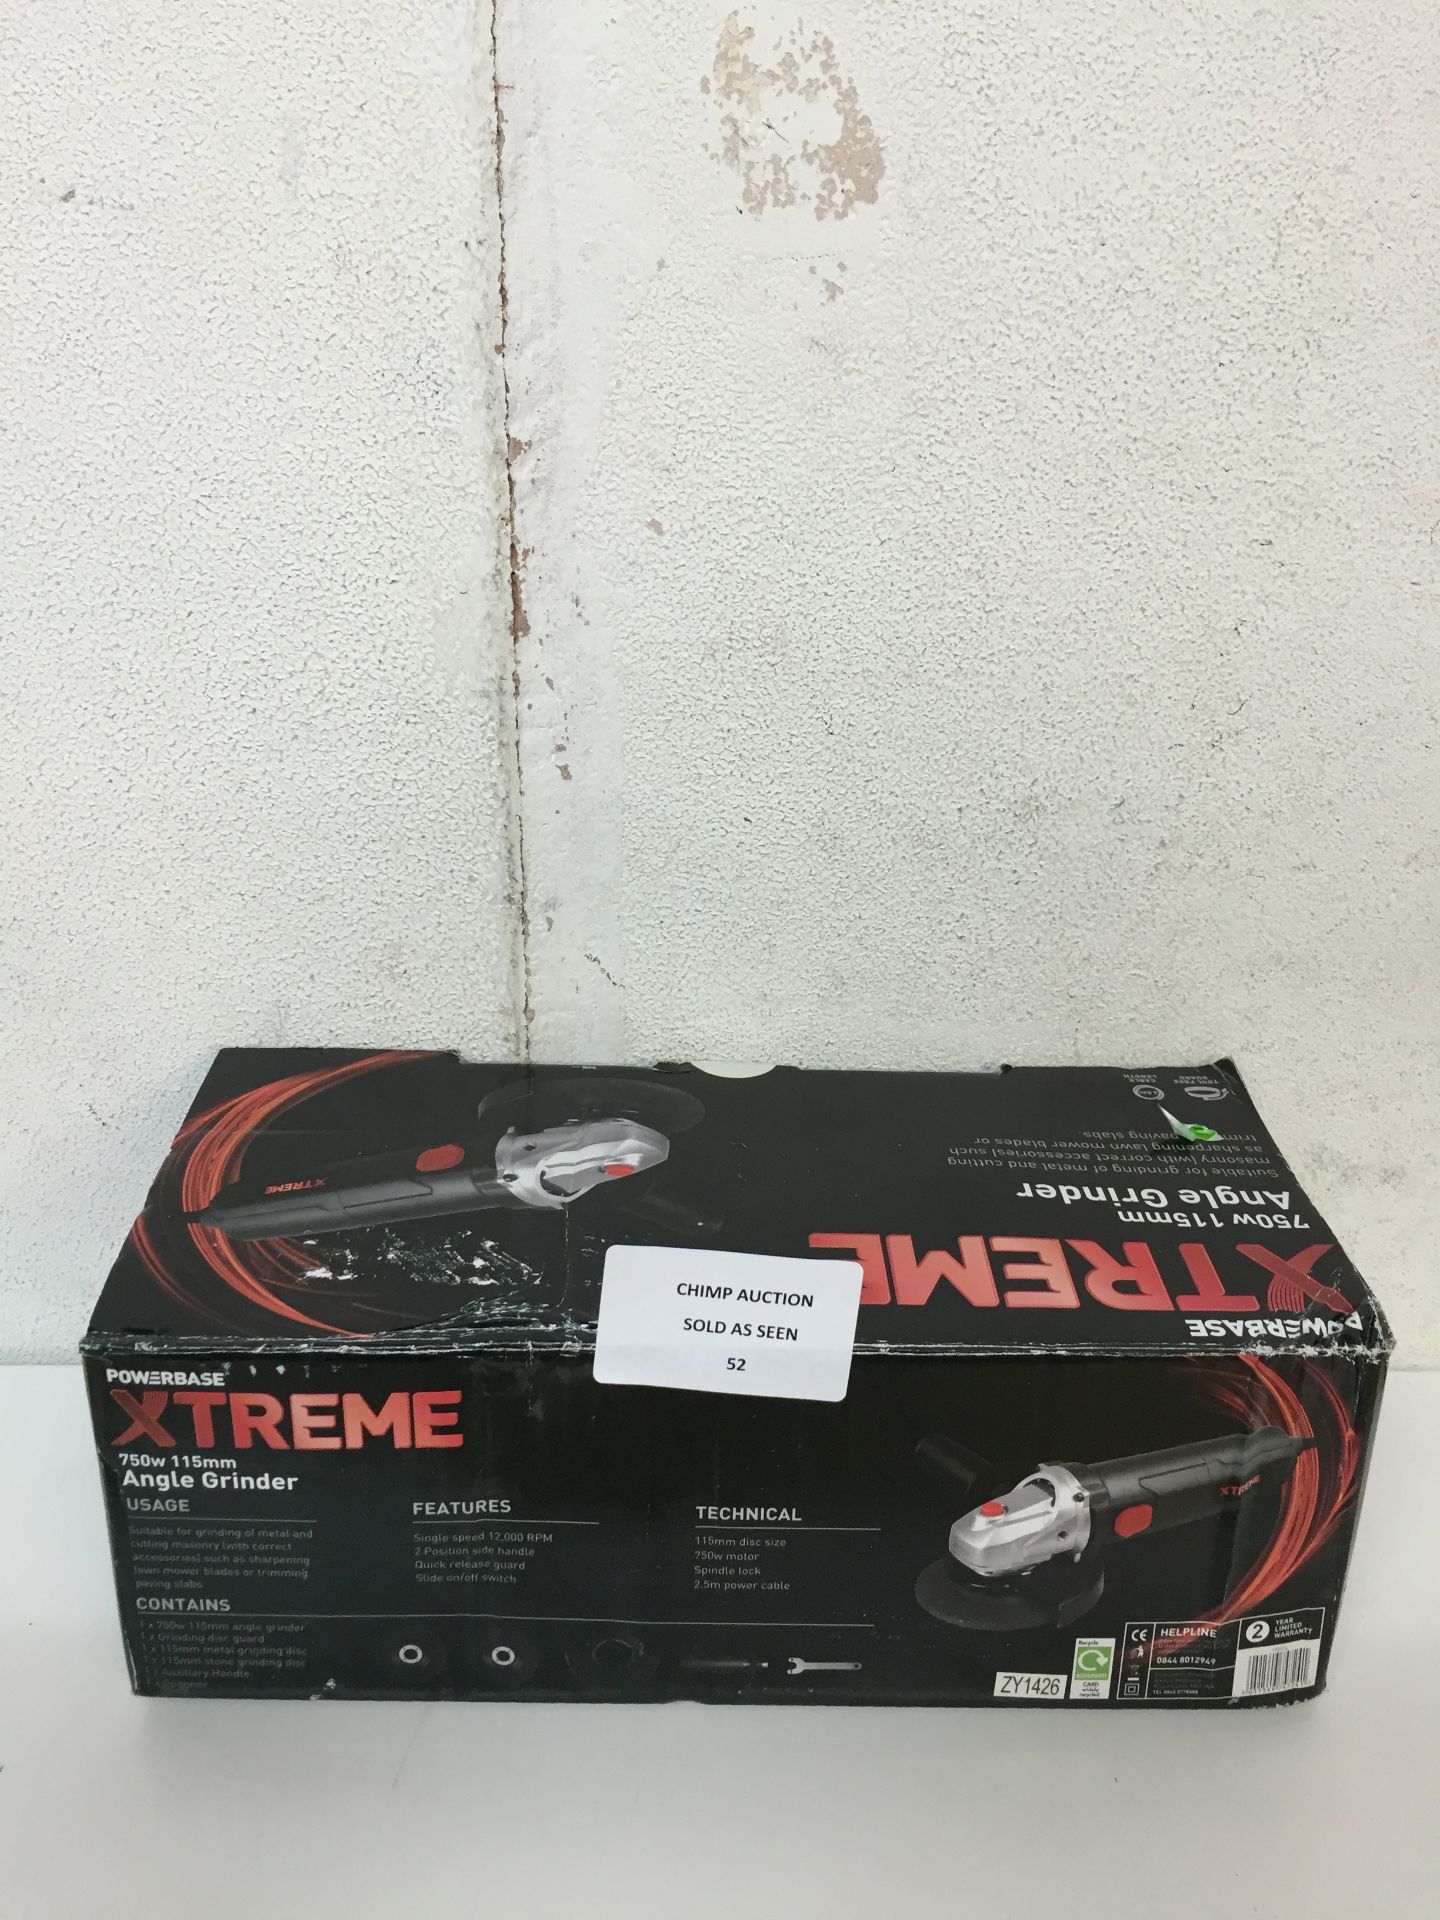 XTREME 750W 115mm Angle Grinder RRP £39.99/ UNTESTED